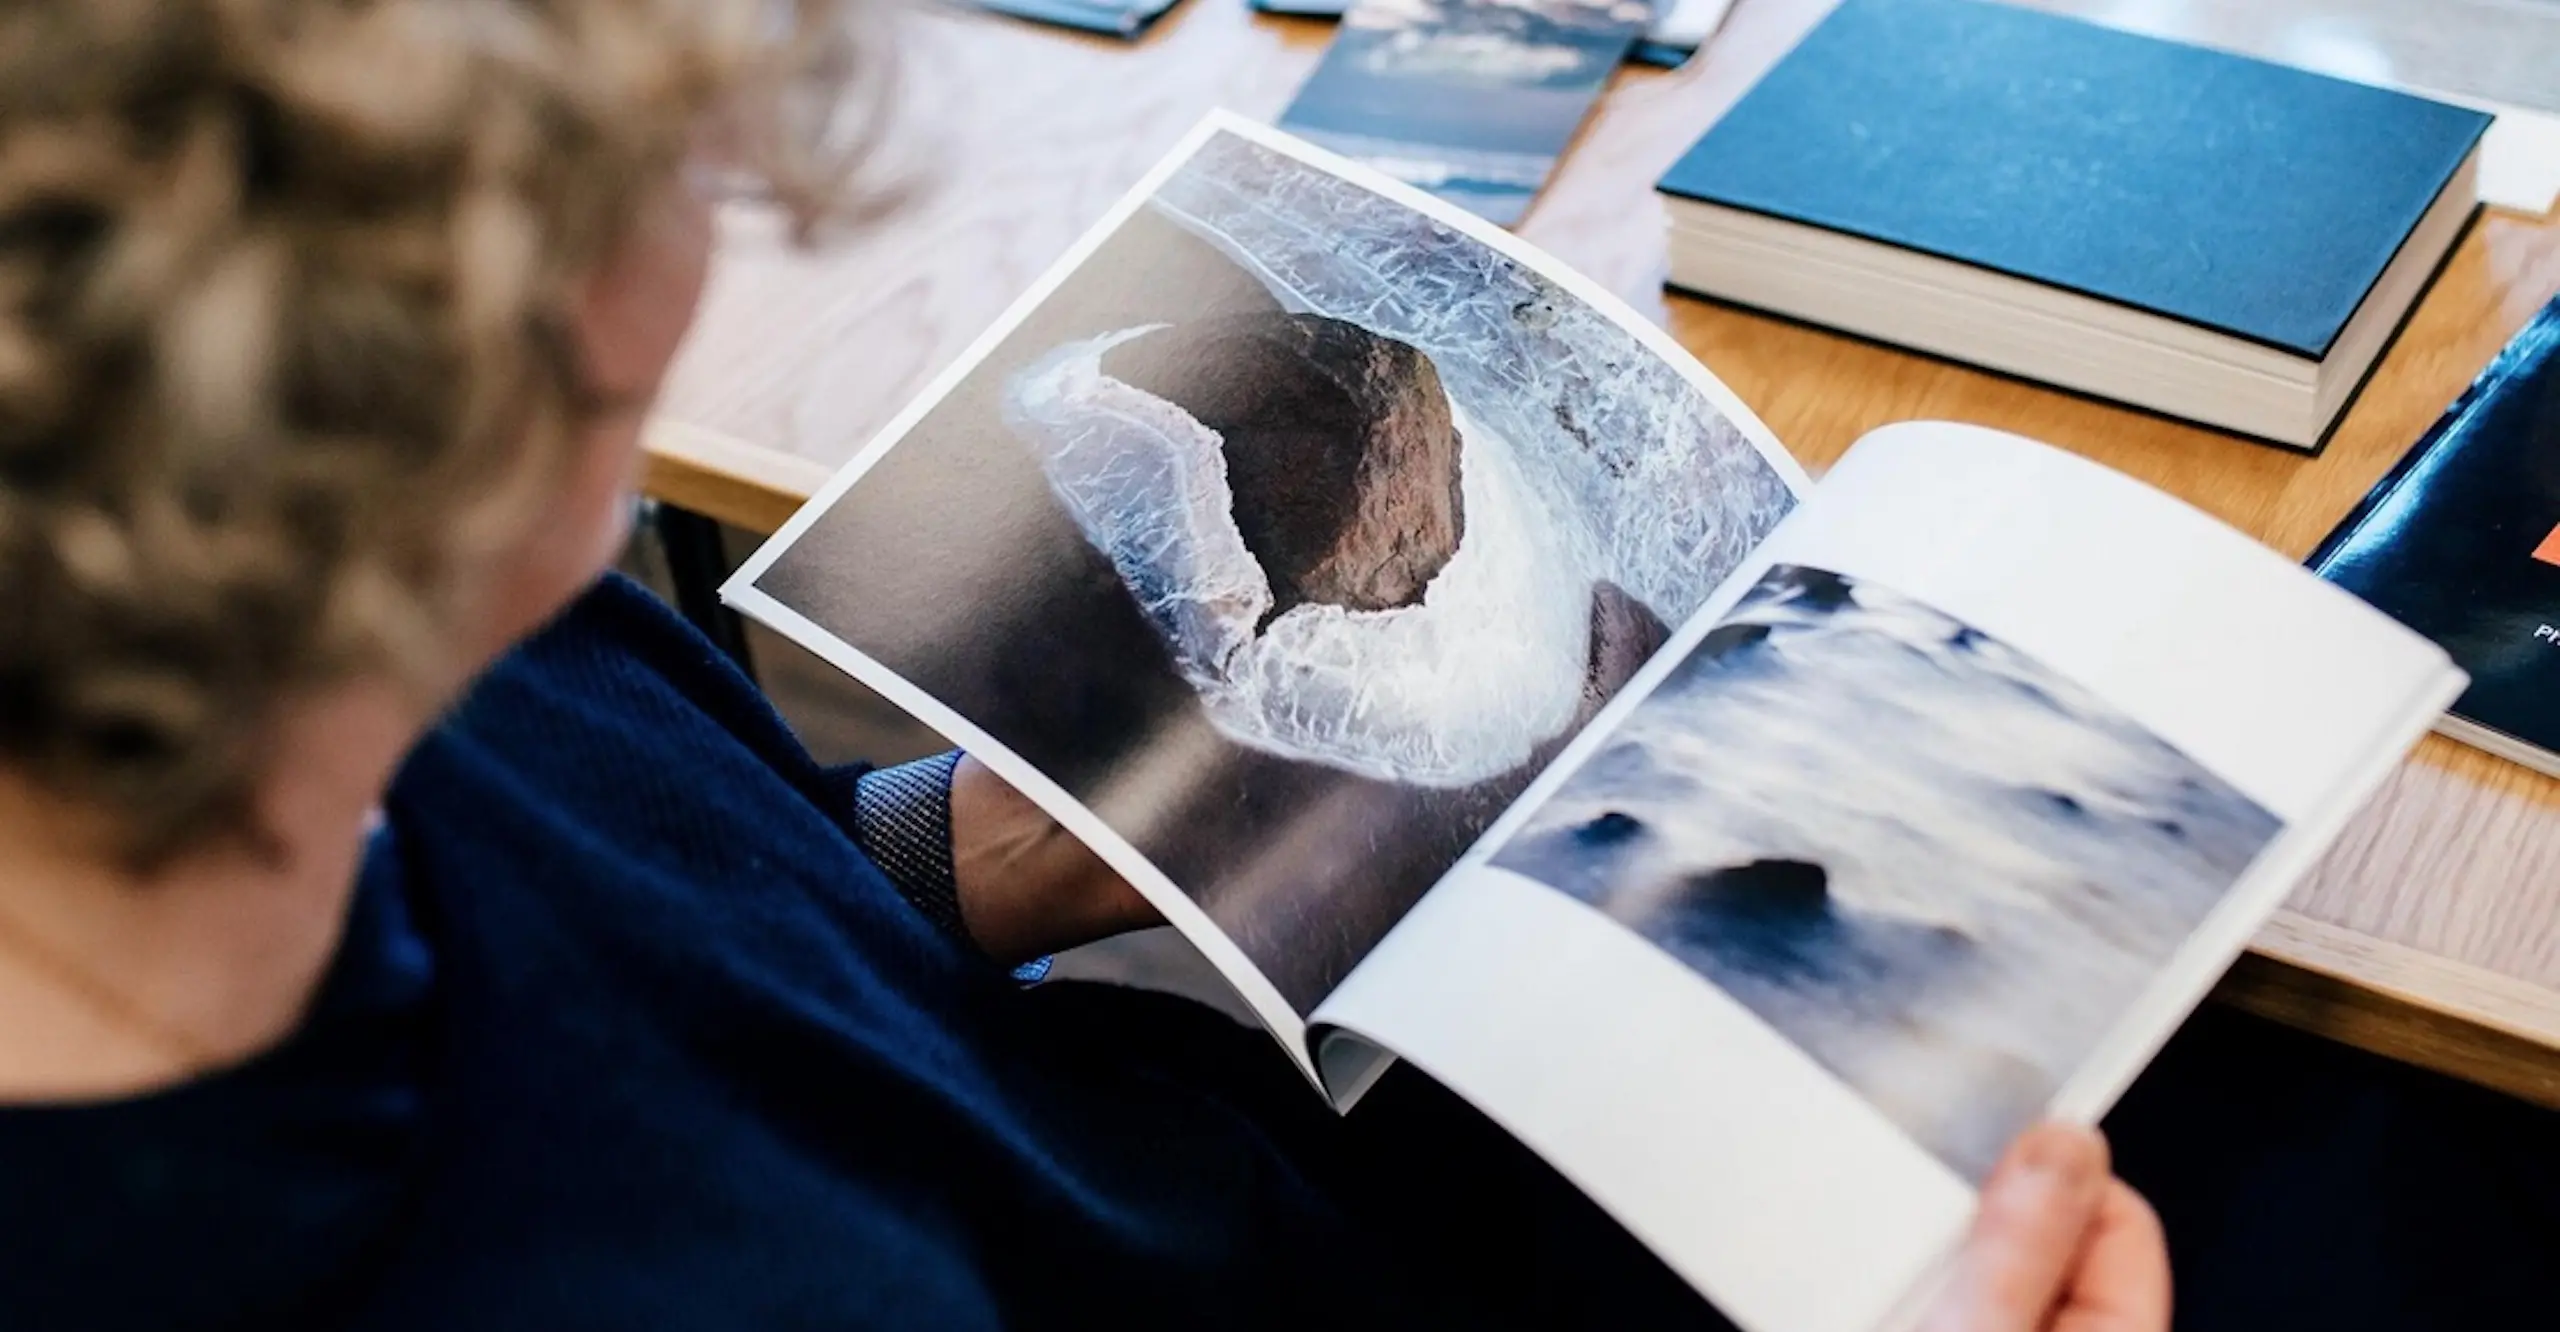 A person looking at photographs in an open book.